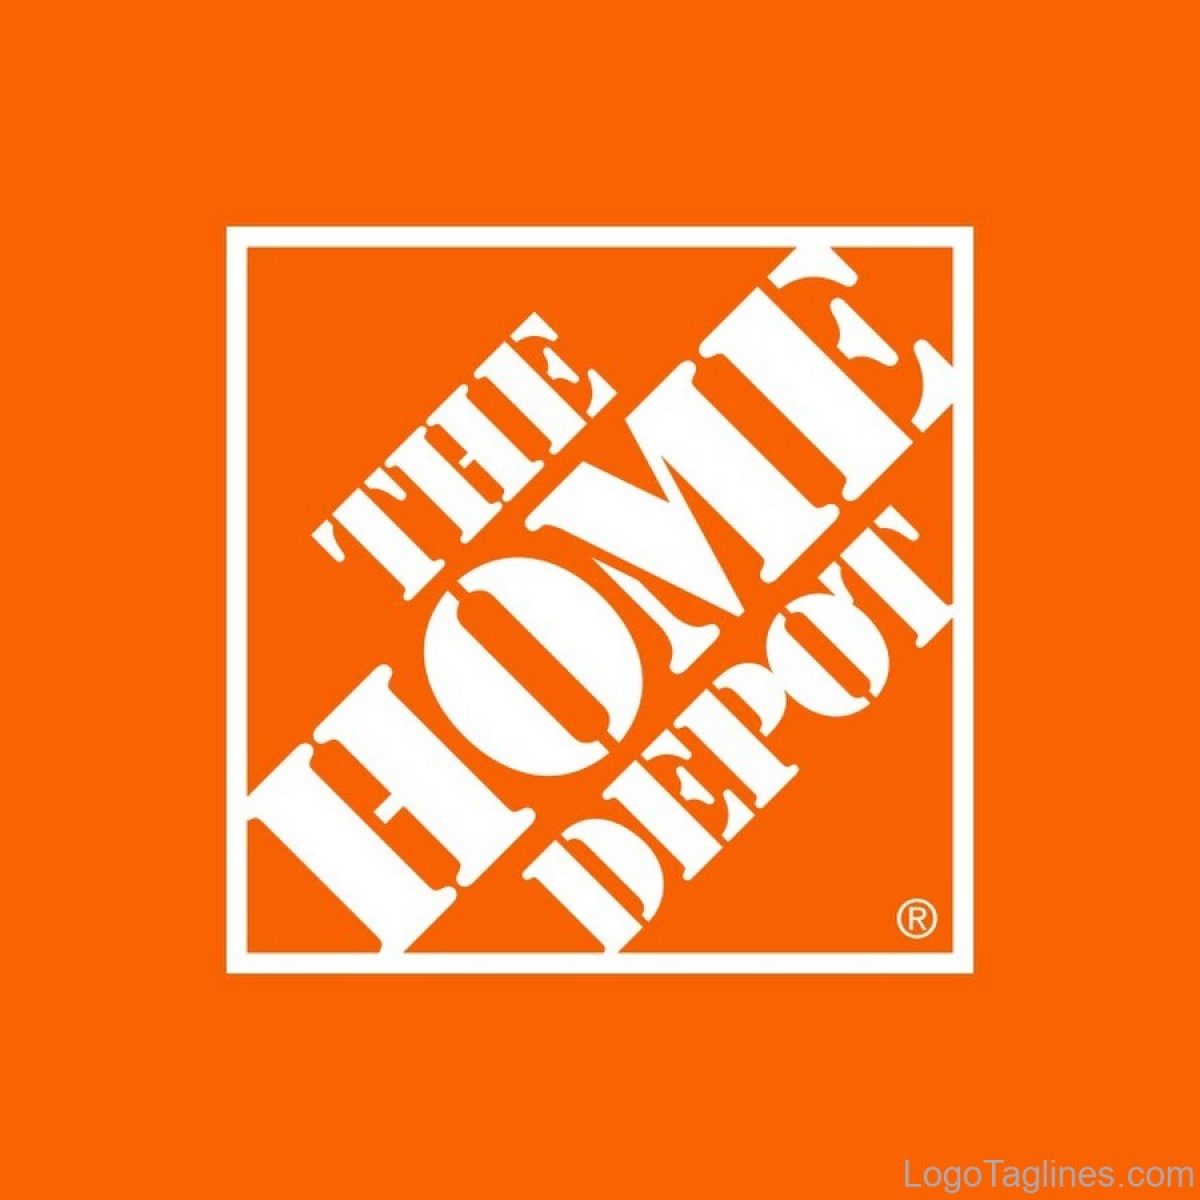 Home Depot Logo - Find Evermark products